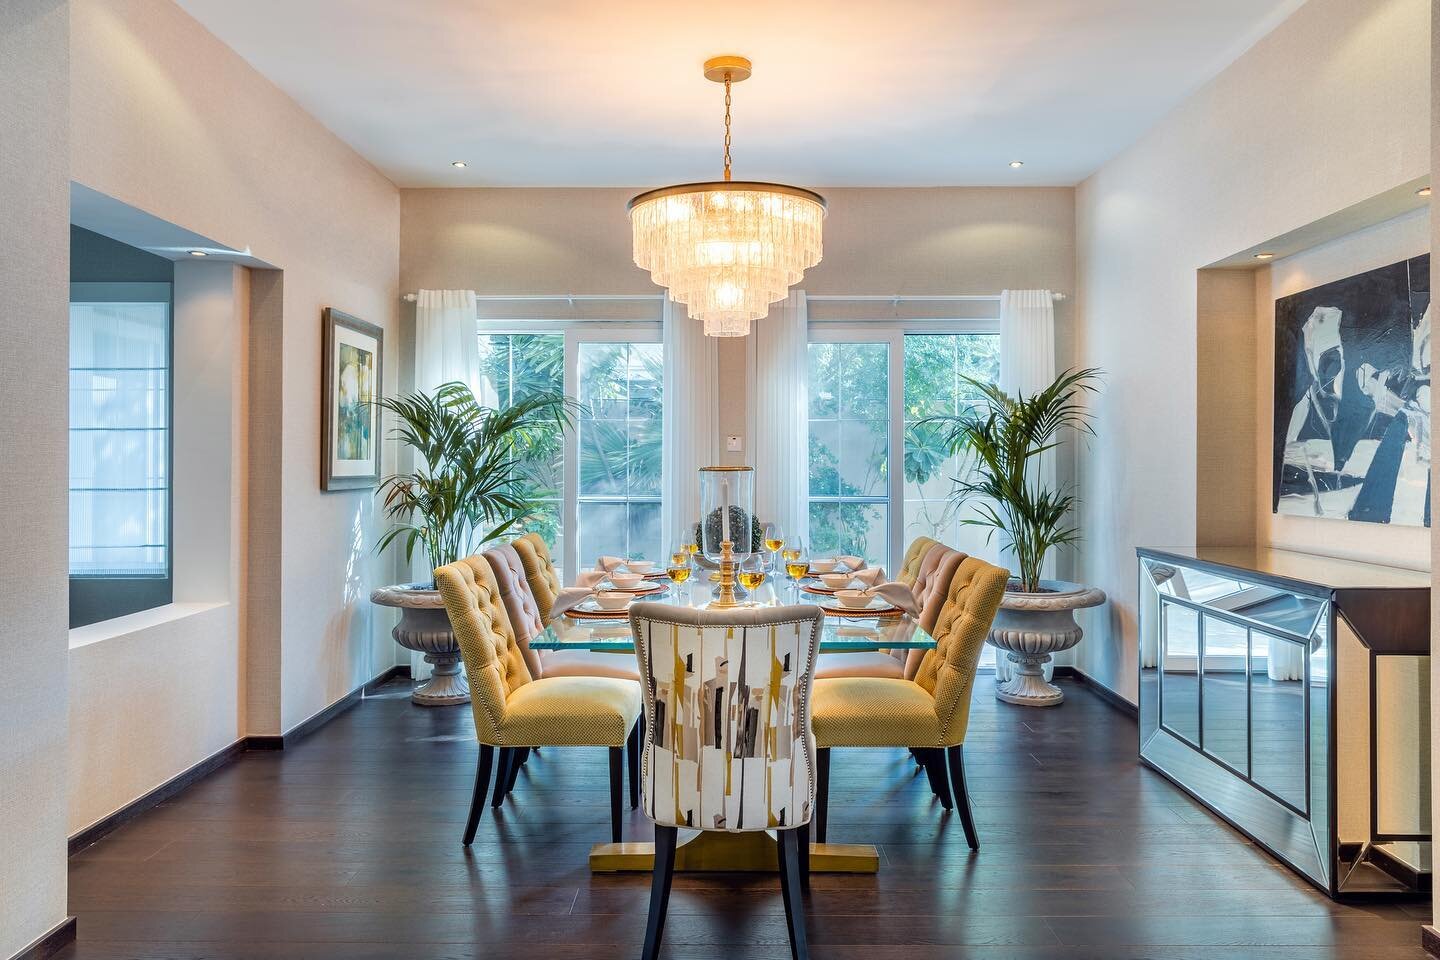 Serene dining rooms.
A little bit of styling goes a Long way.
Dining table by @aishaashrafinteriors bespoke